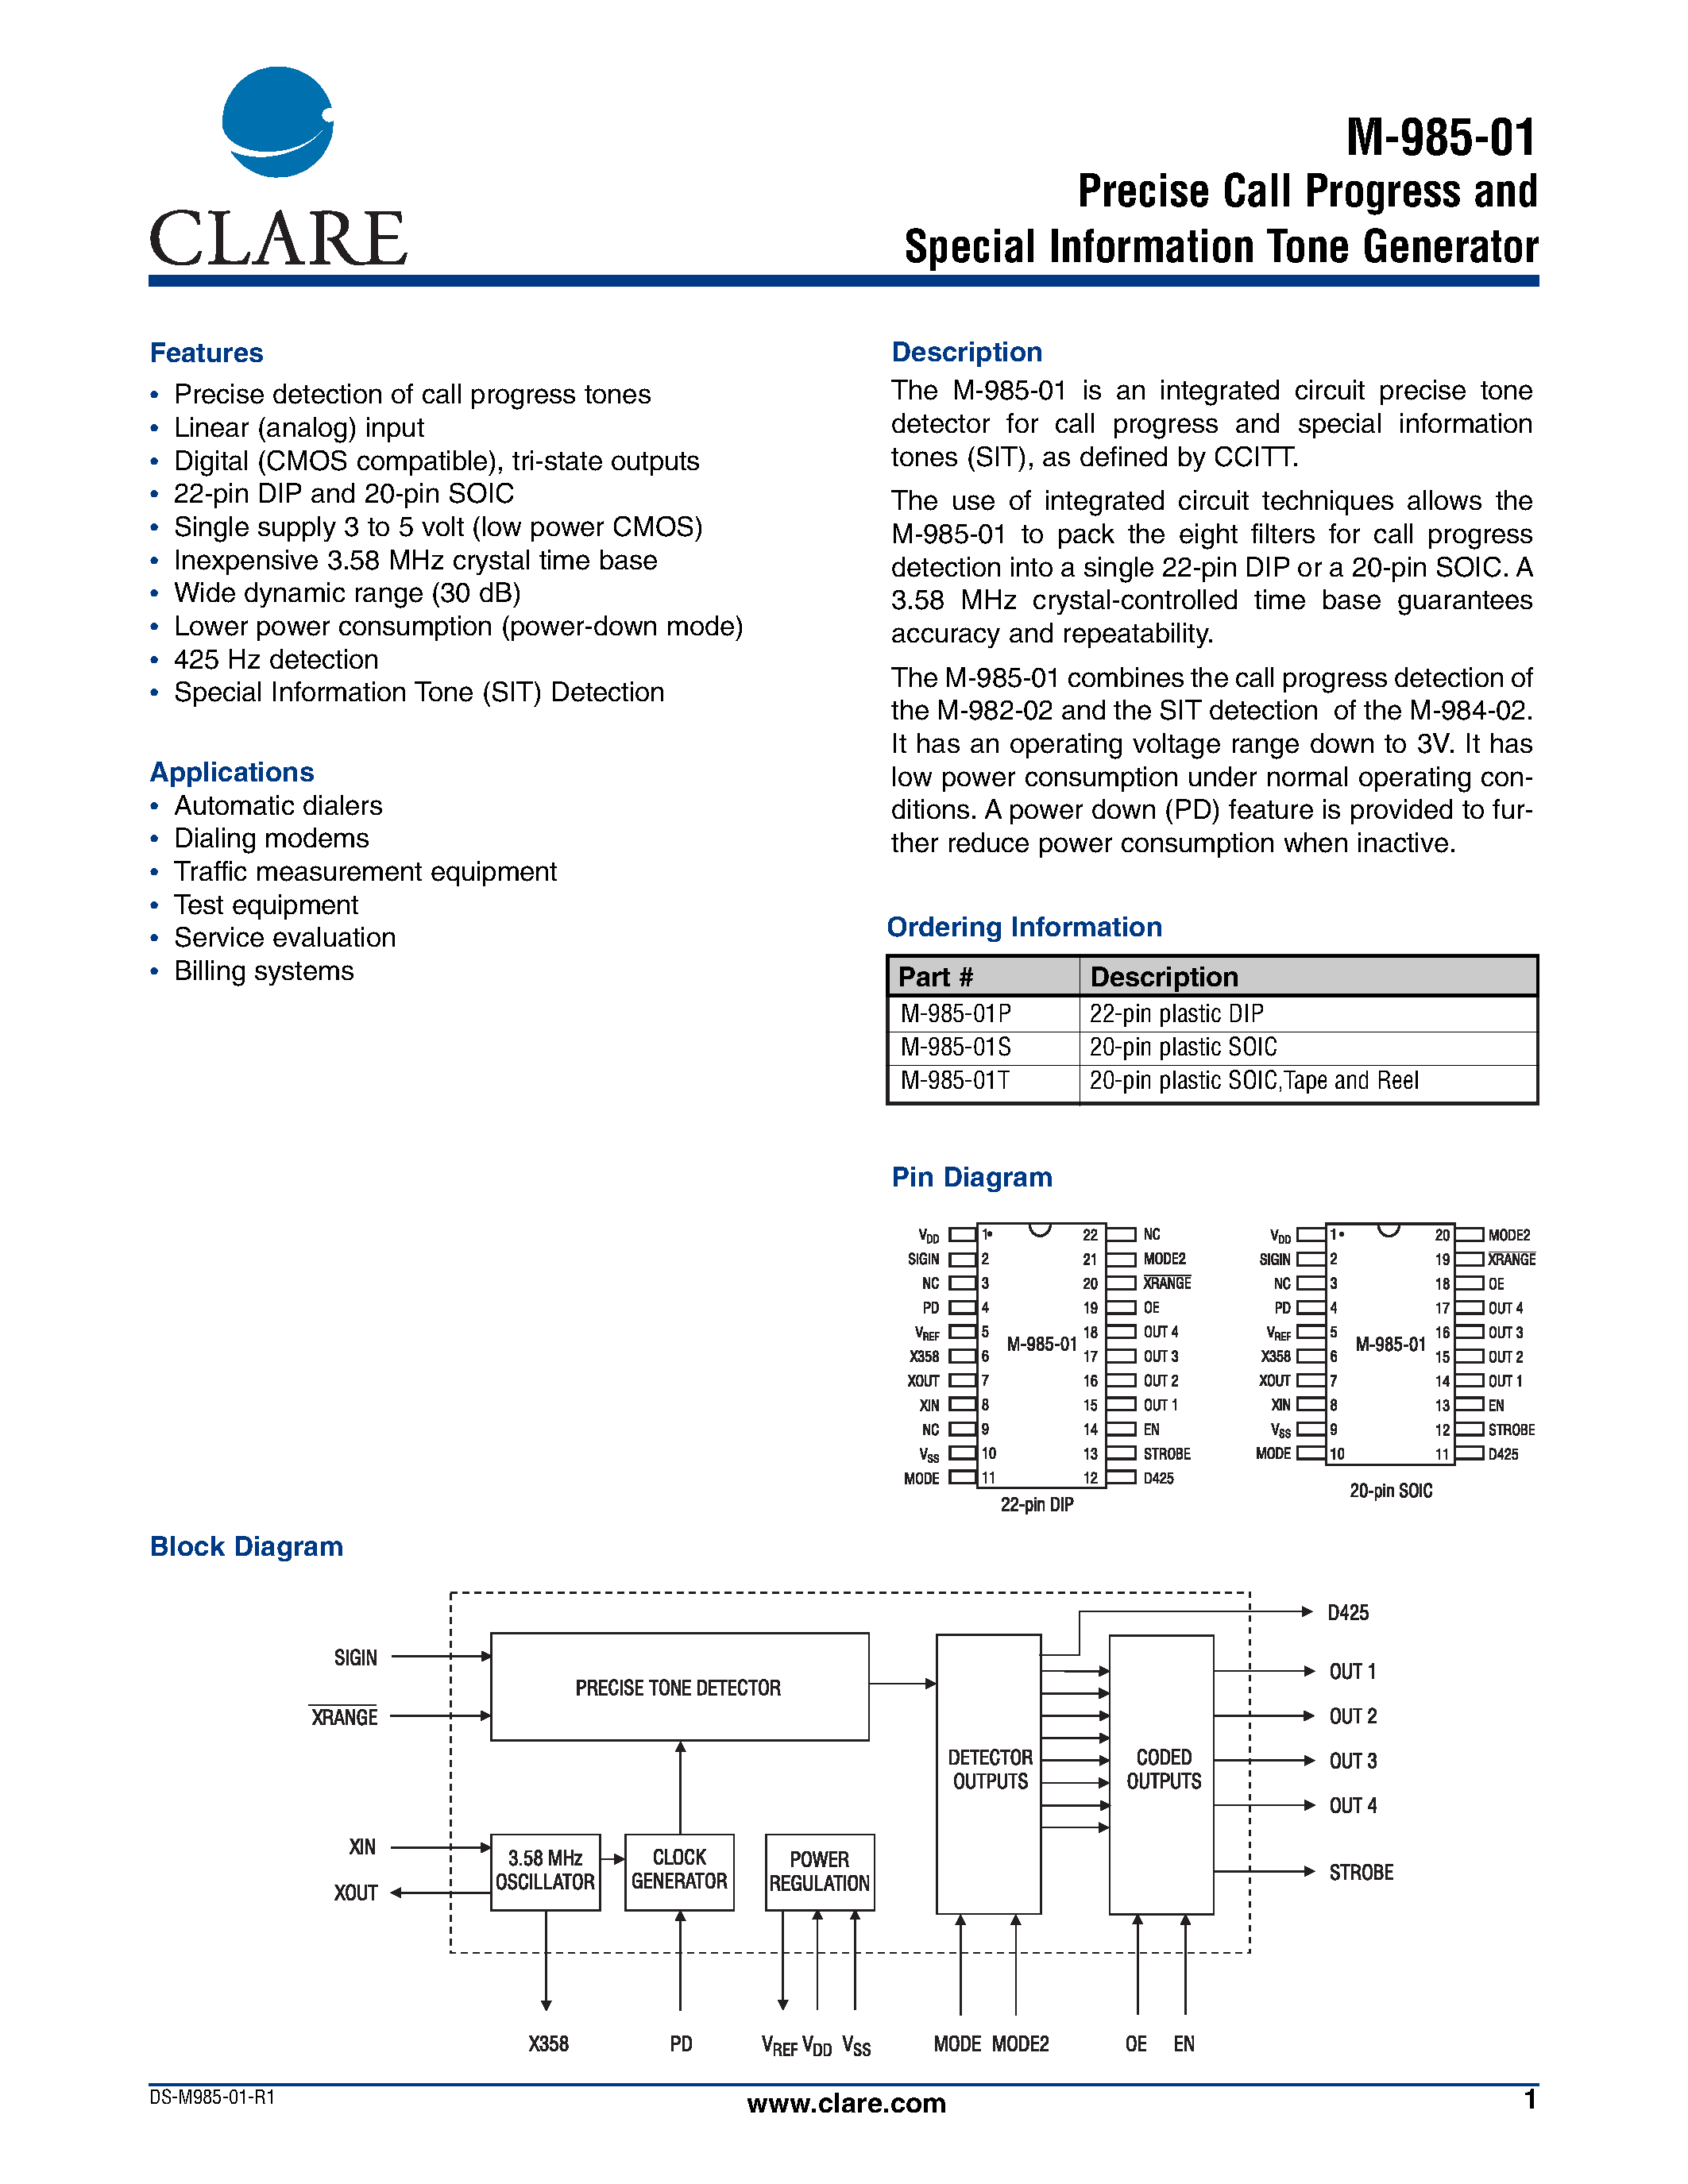 Datasheet M-985-01 - Precise Call Progress and Special Information Tone Generator page 1